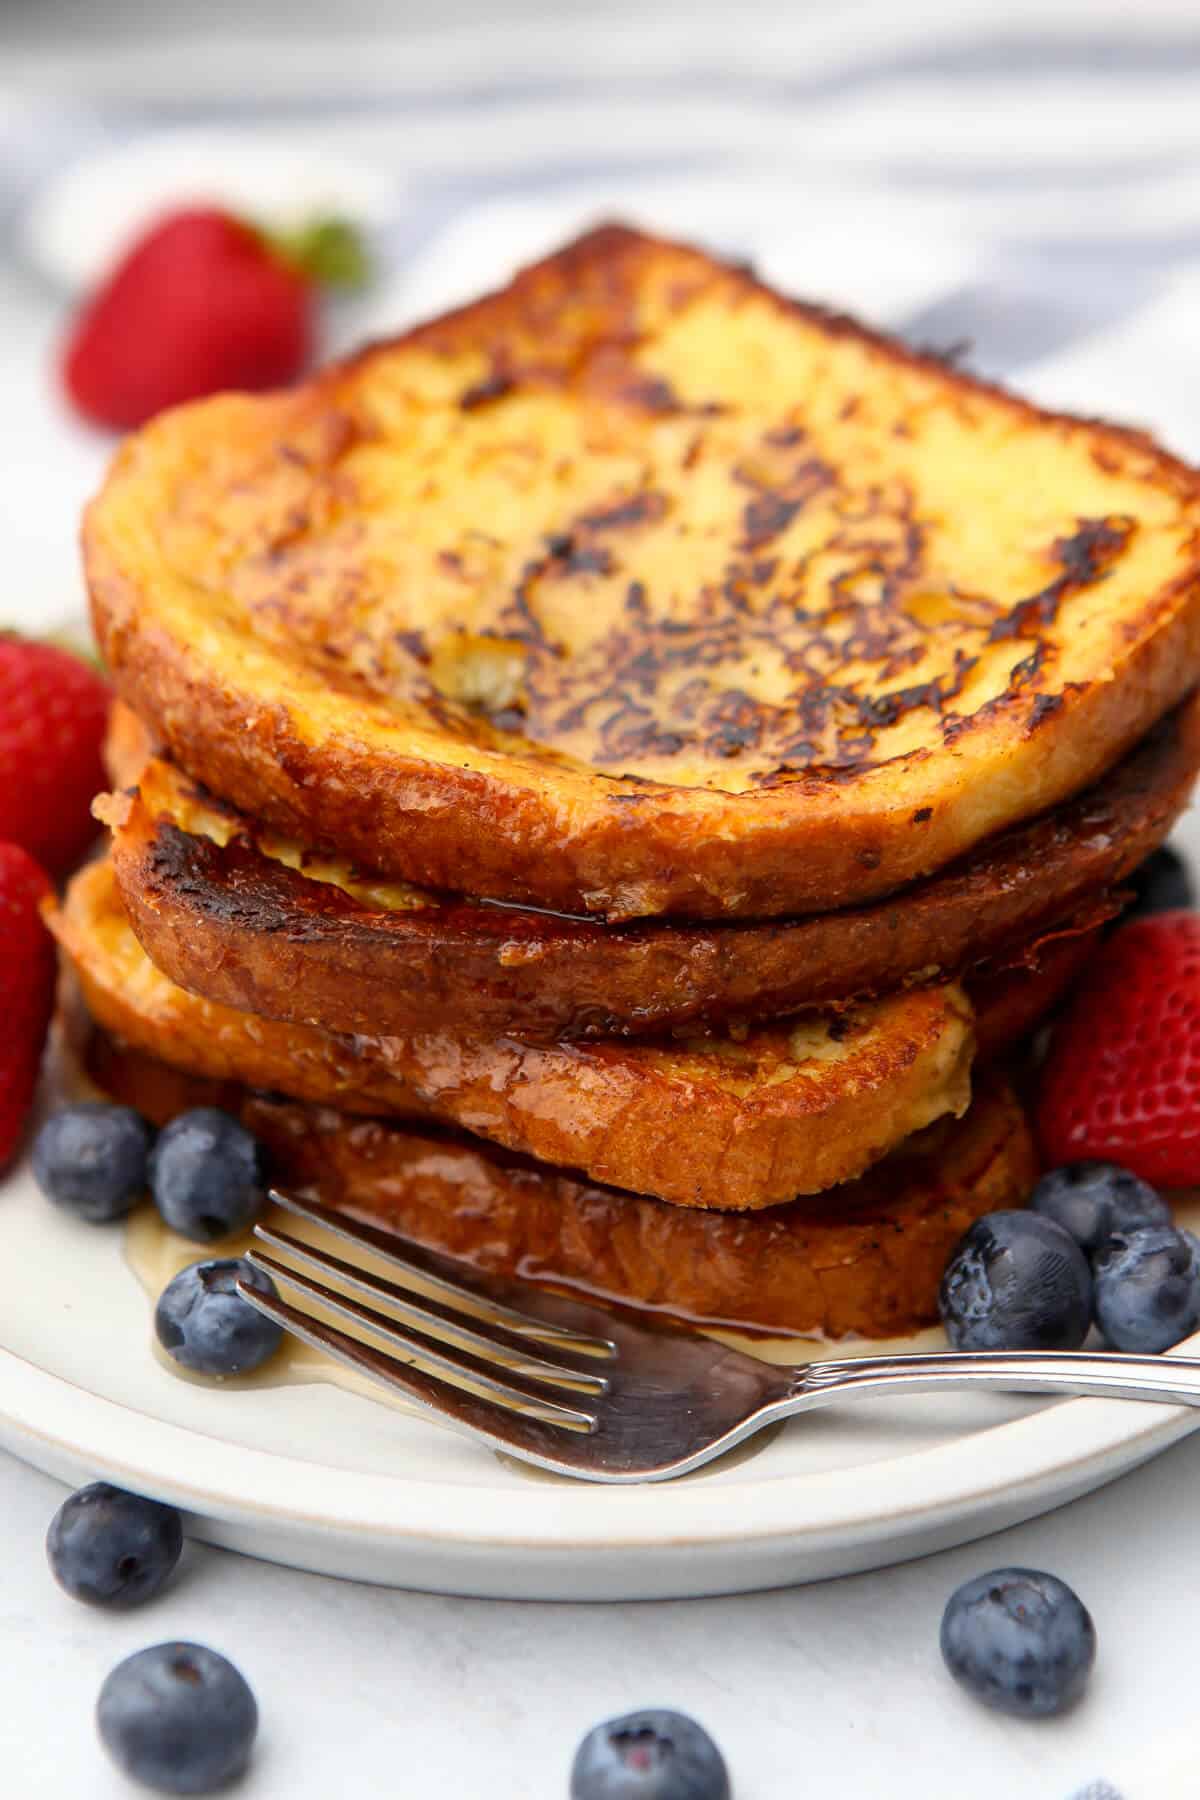 A stack of vegan French toast on a white plate with berries on the side made with Just Egg.